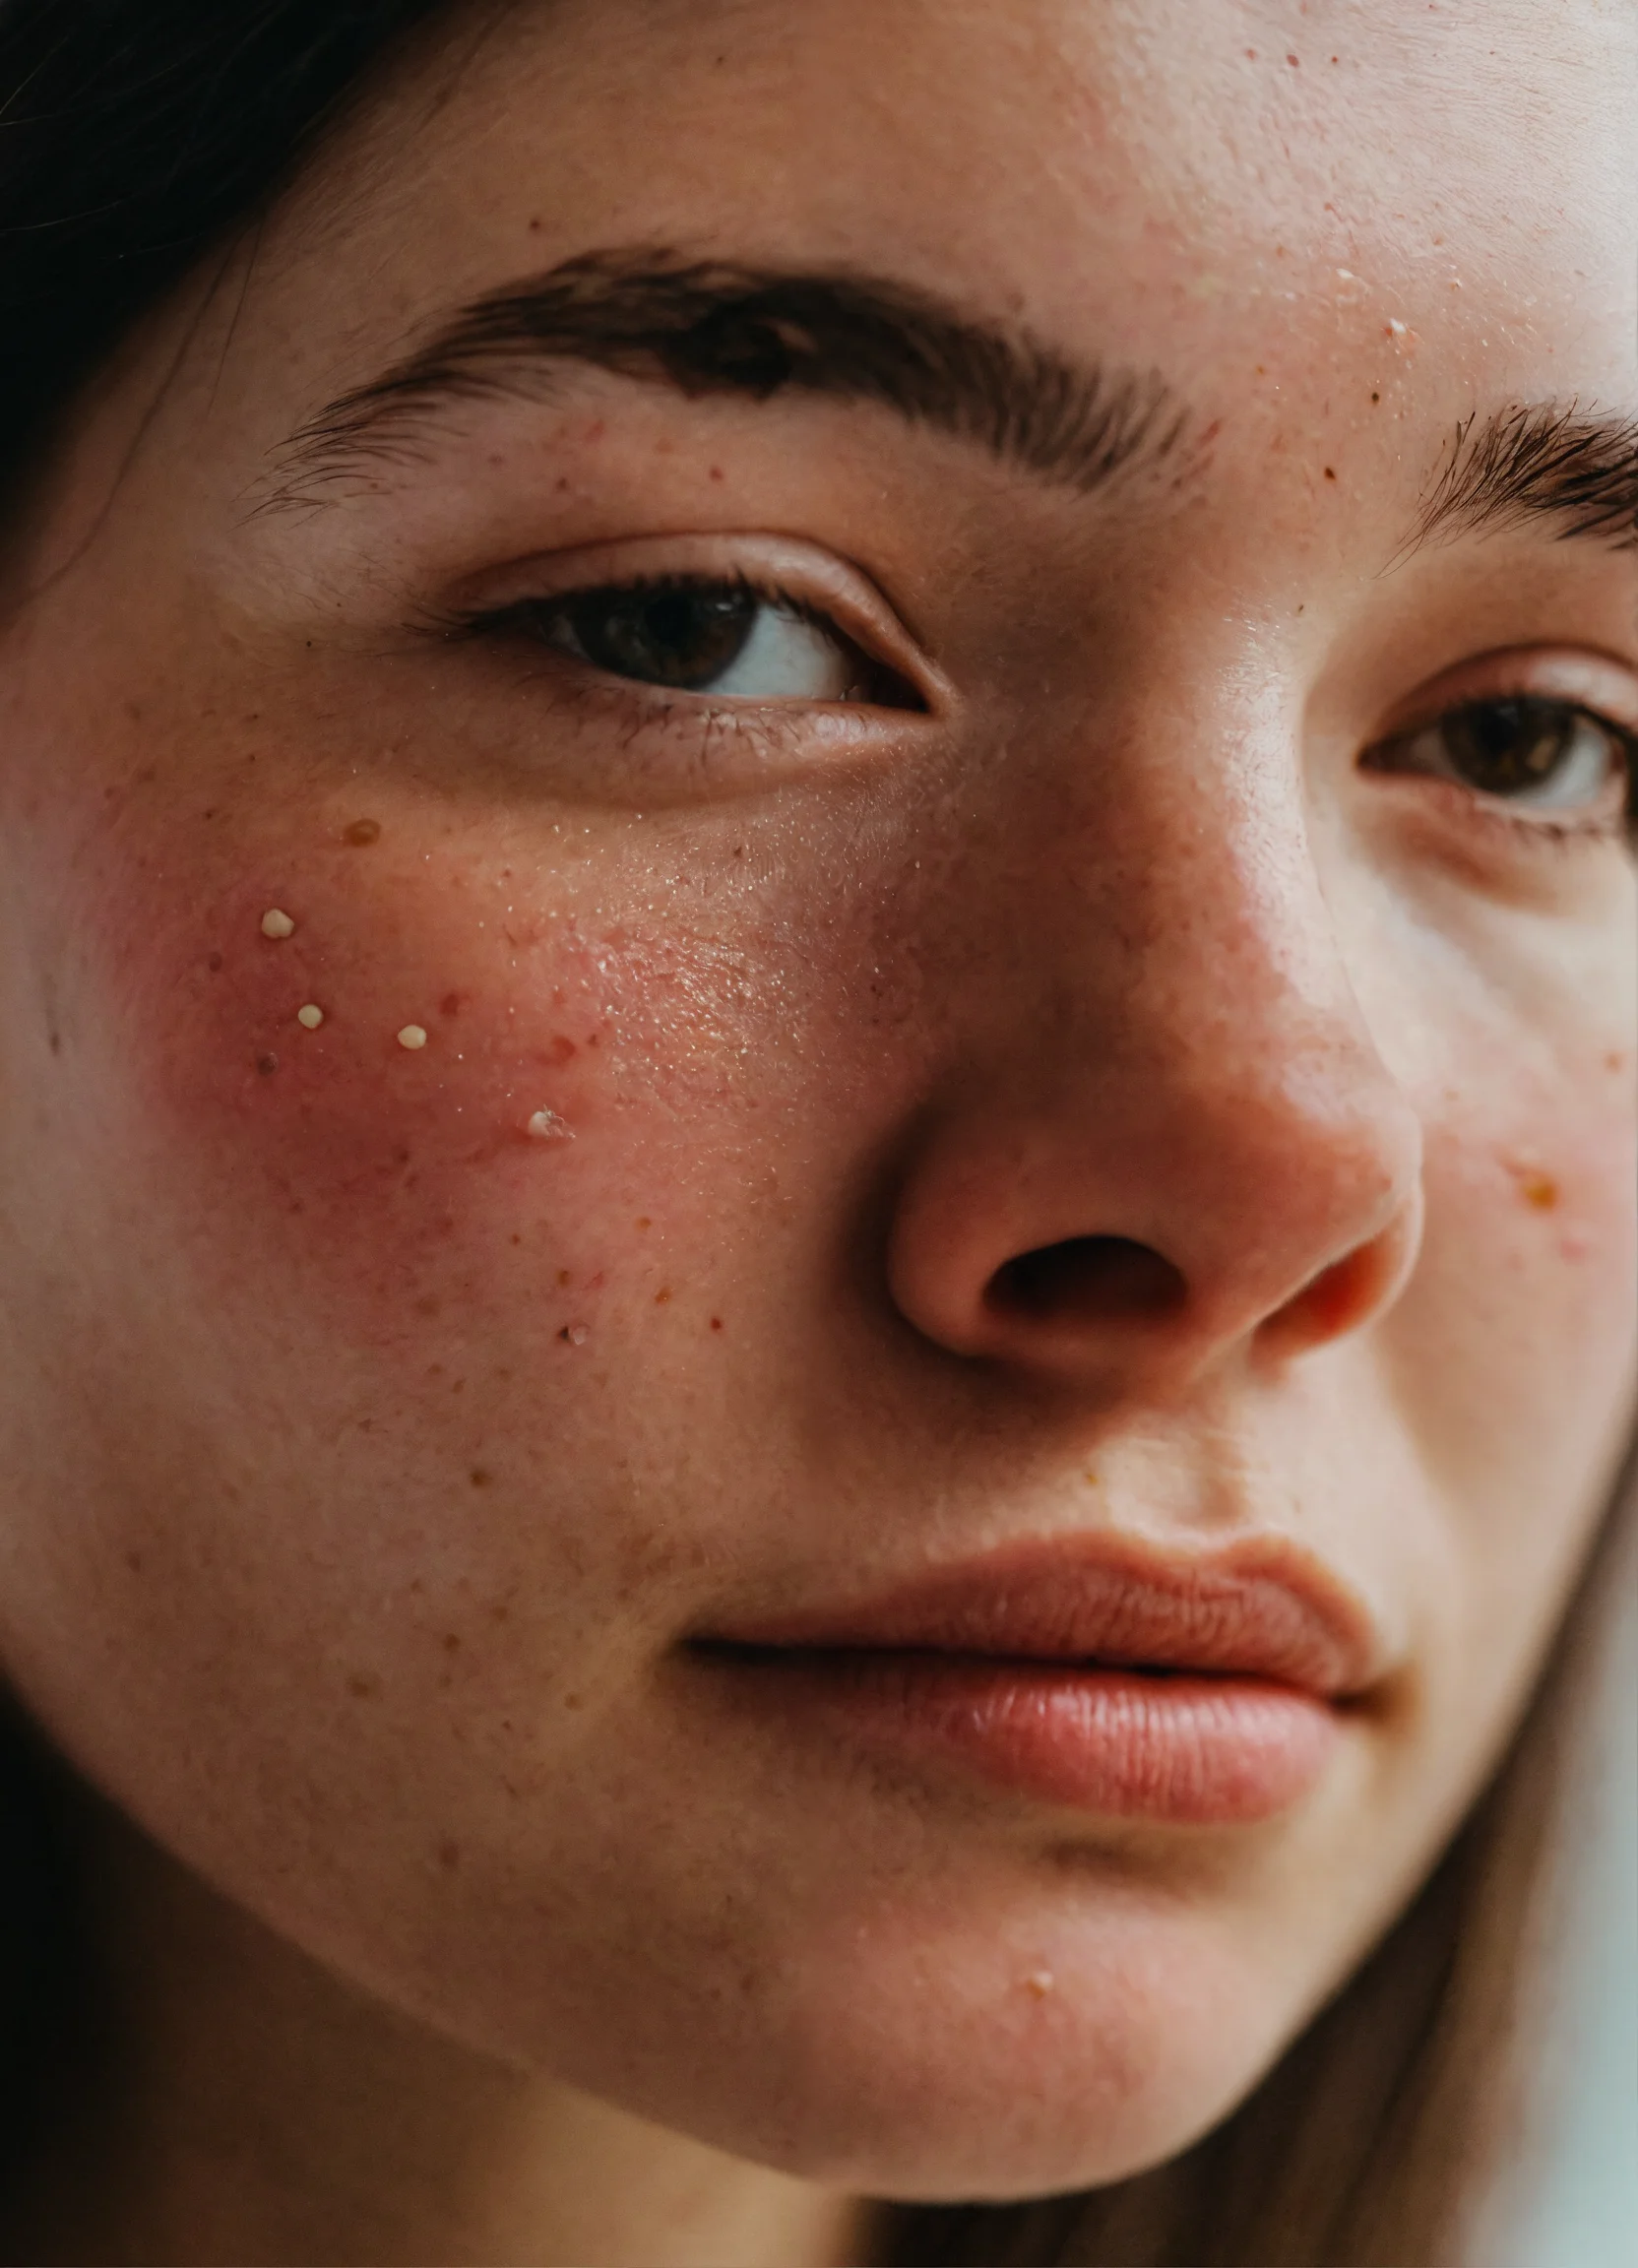 Q: I’ve been treating acne for several months and nothing is helping. Should I just quit the therapy if there’s no result anyway?